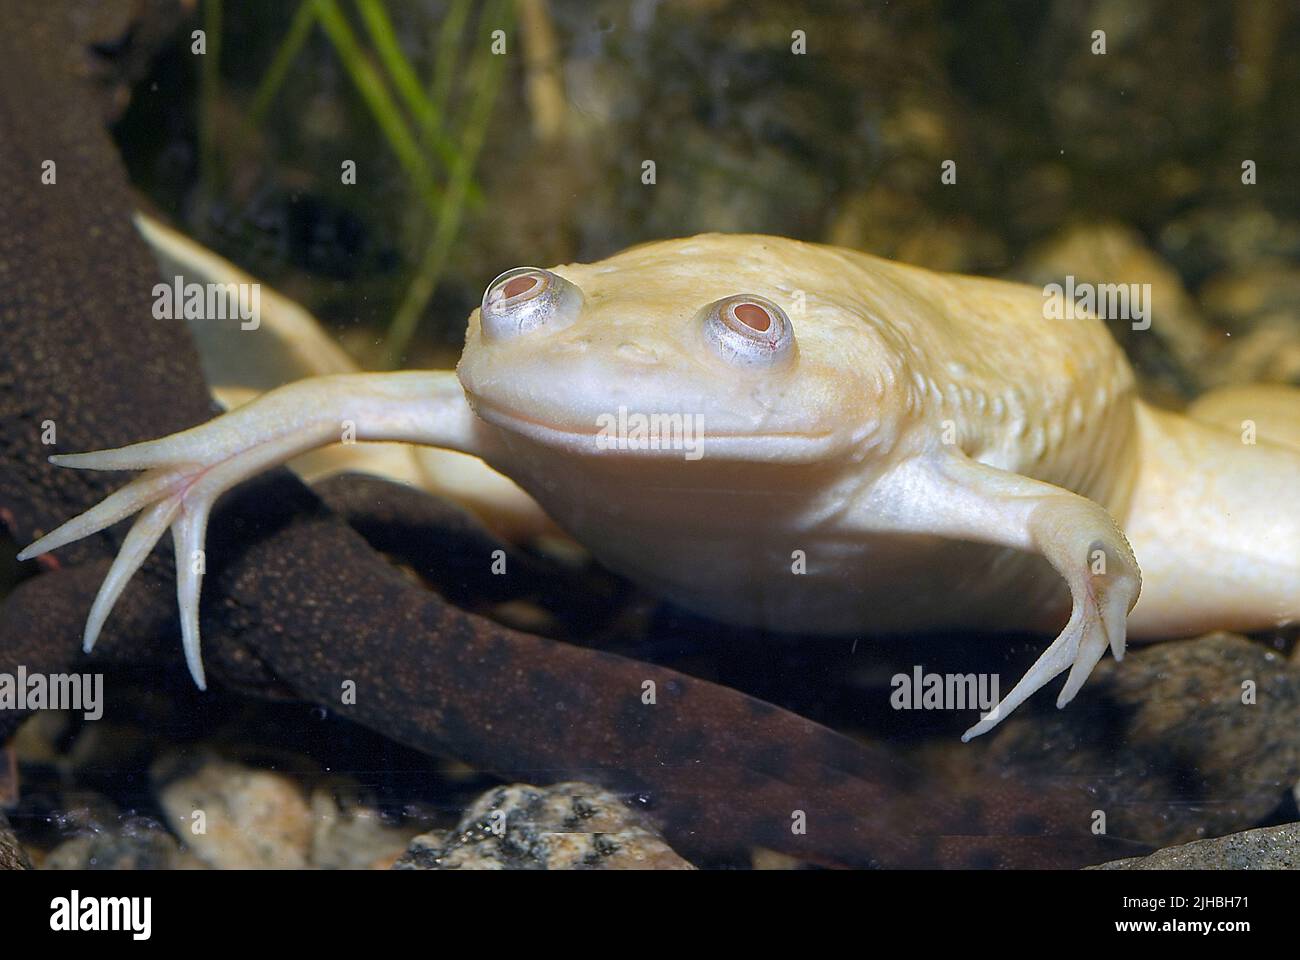 African Clawed Frog, Xenopus laevis. The first organisms to be cloned. Has attended three space shuttle missions. Lives permanently in water. Stock Photo